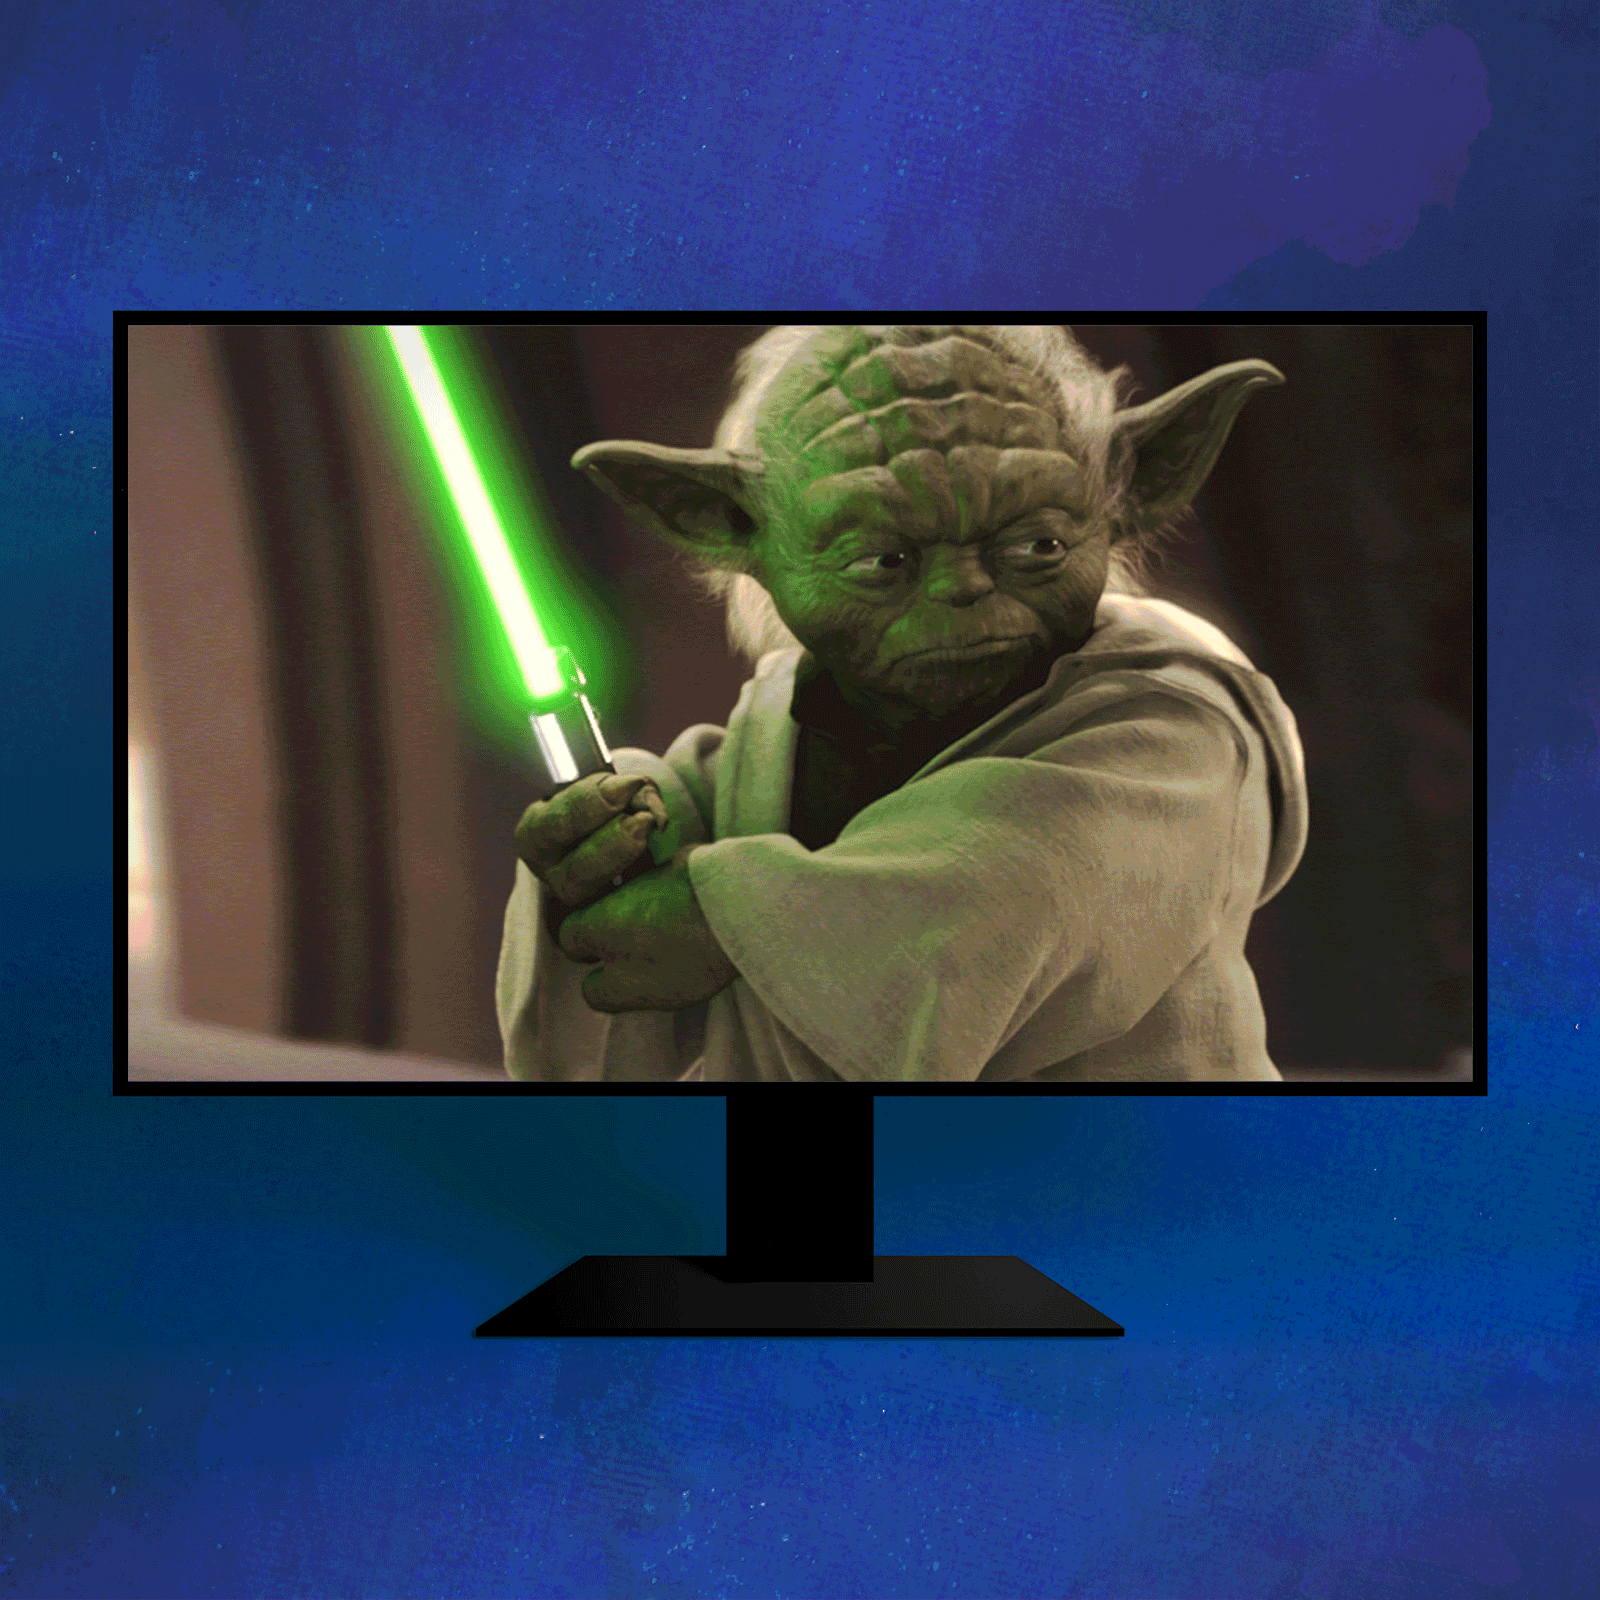 Animation of different star wars movies flashing on a screen